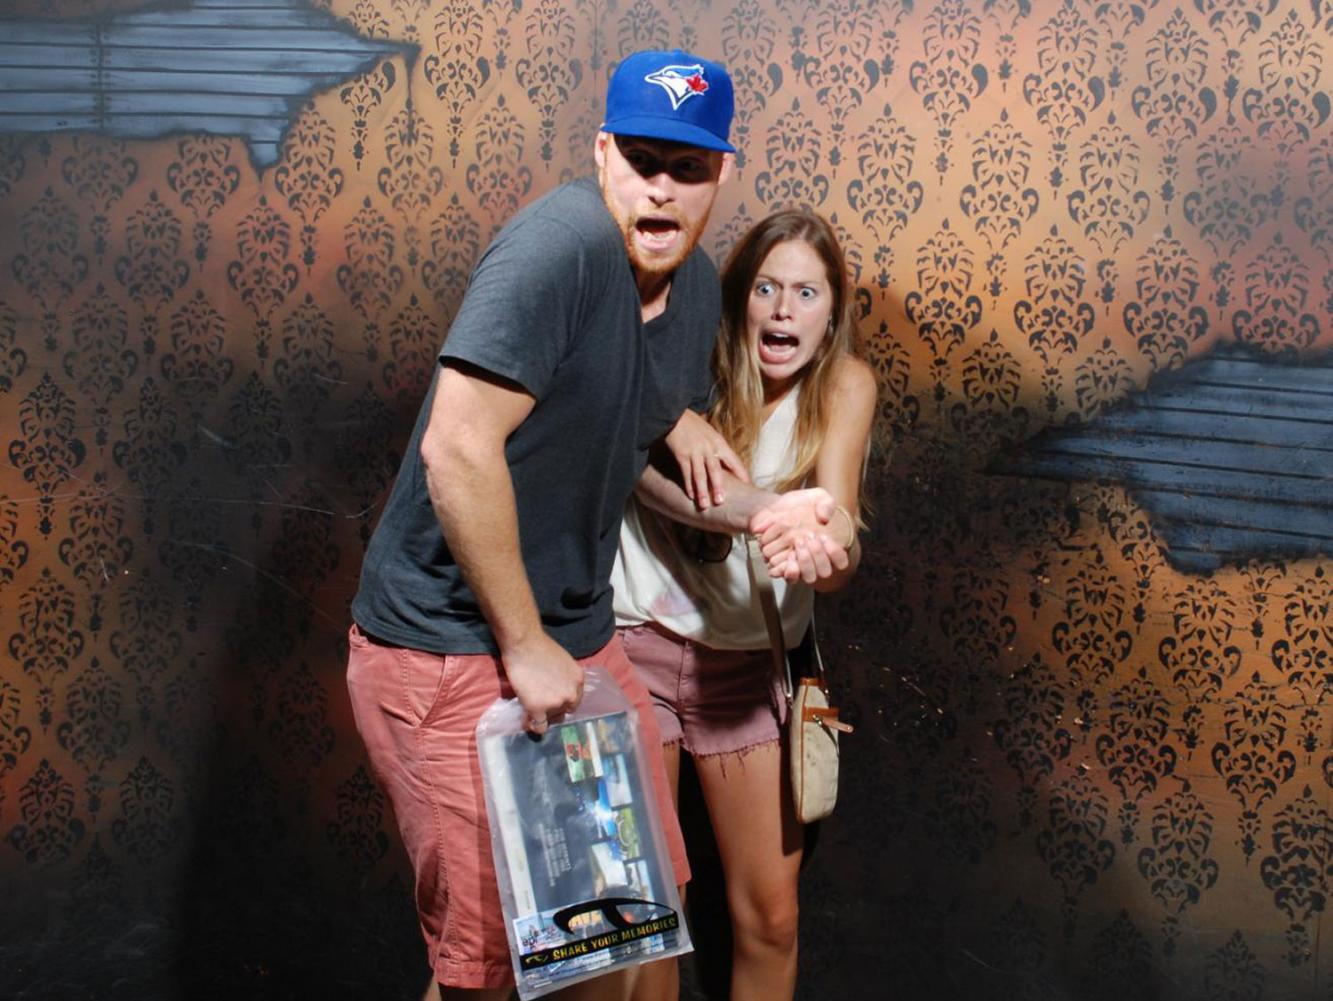 Nightmares Fear Factory Top 40 September 2013 pic0026